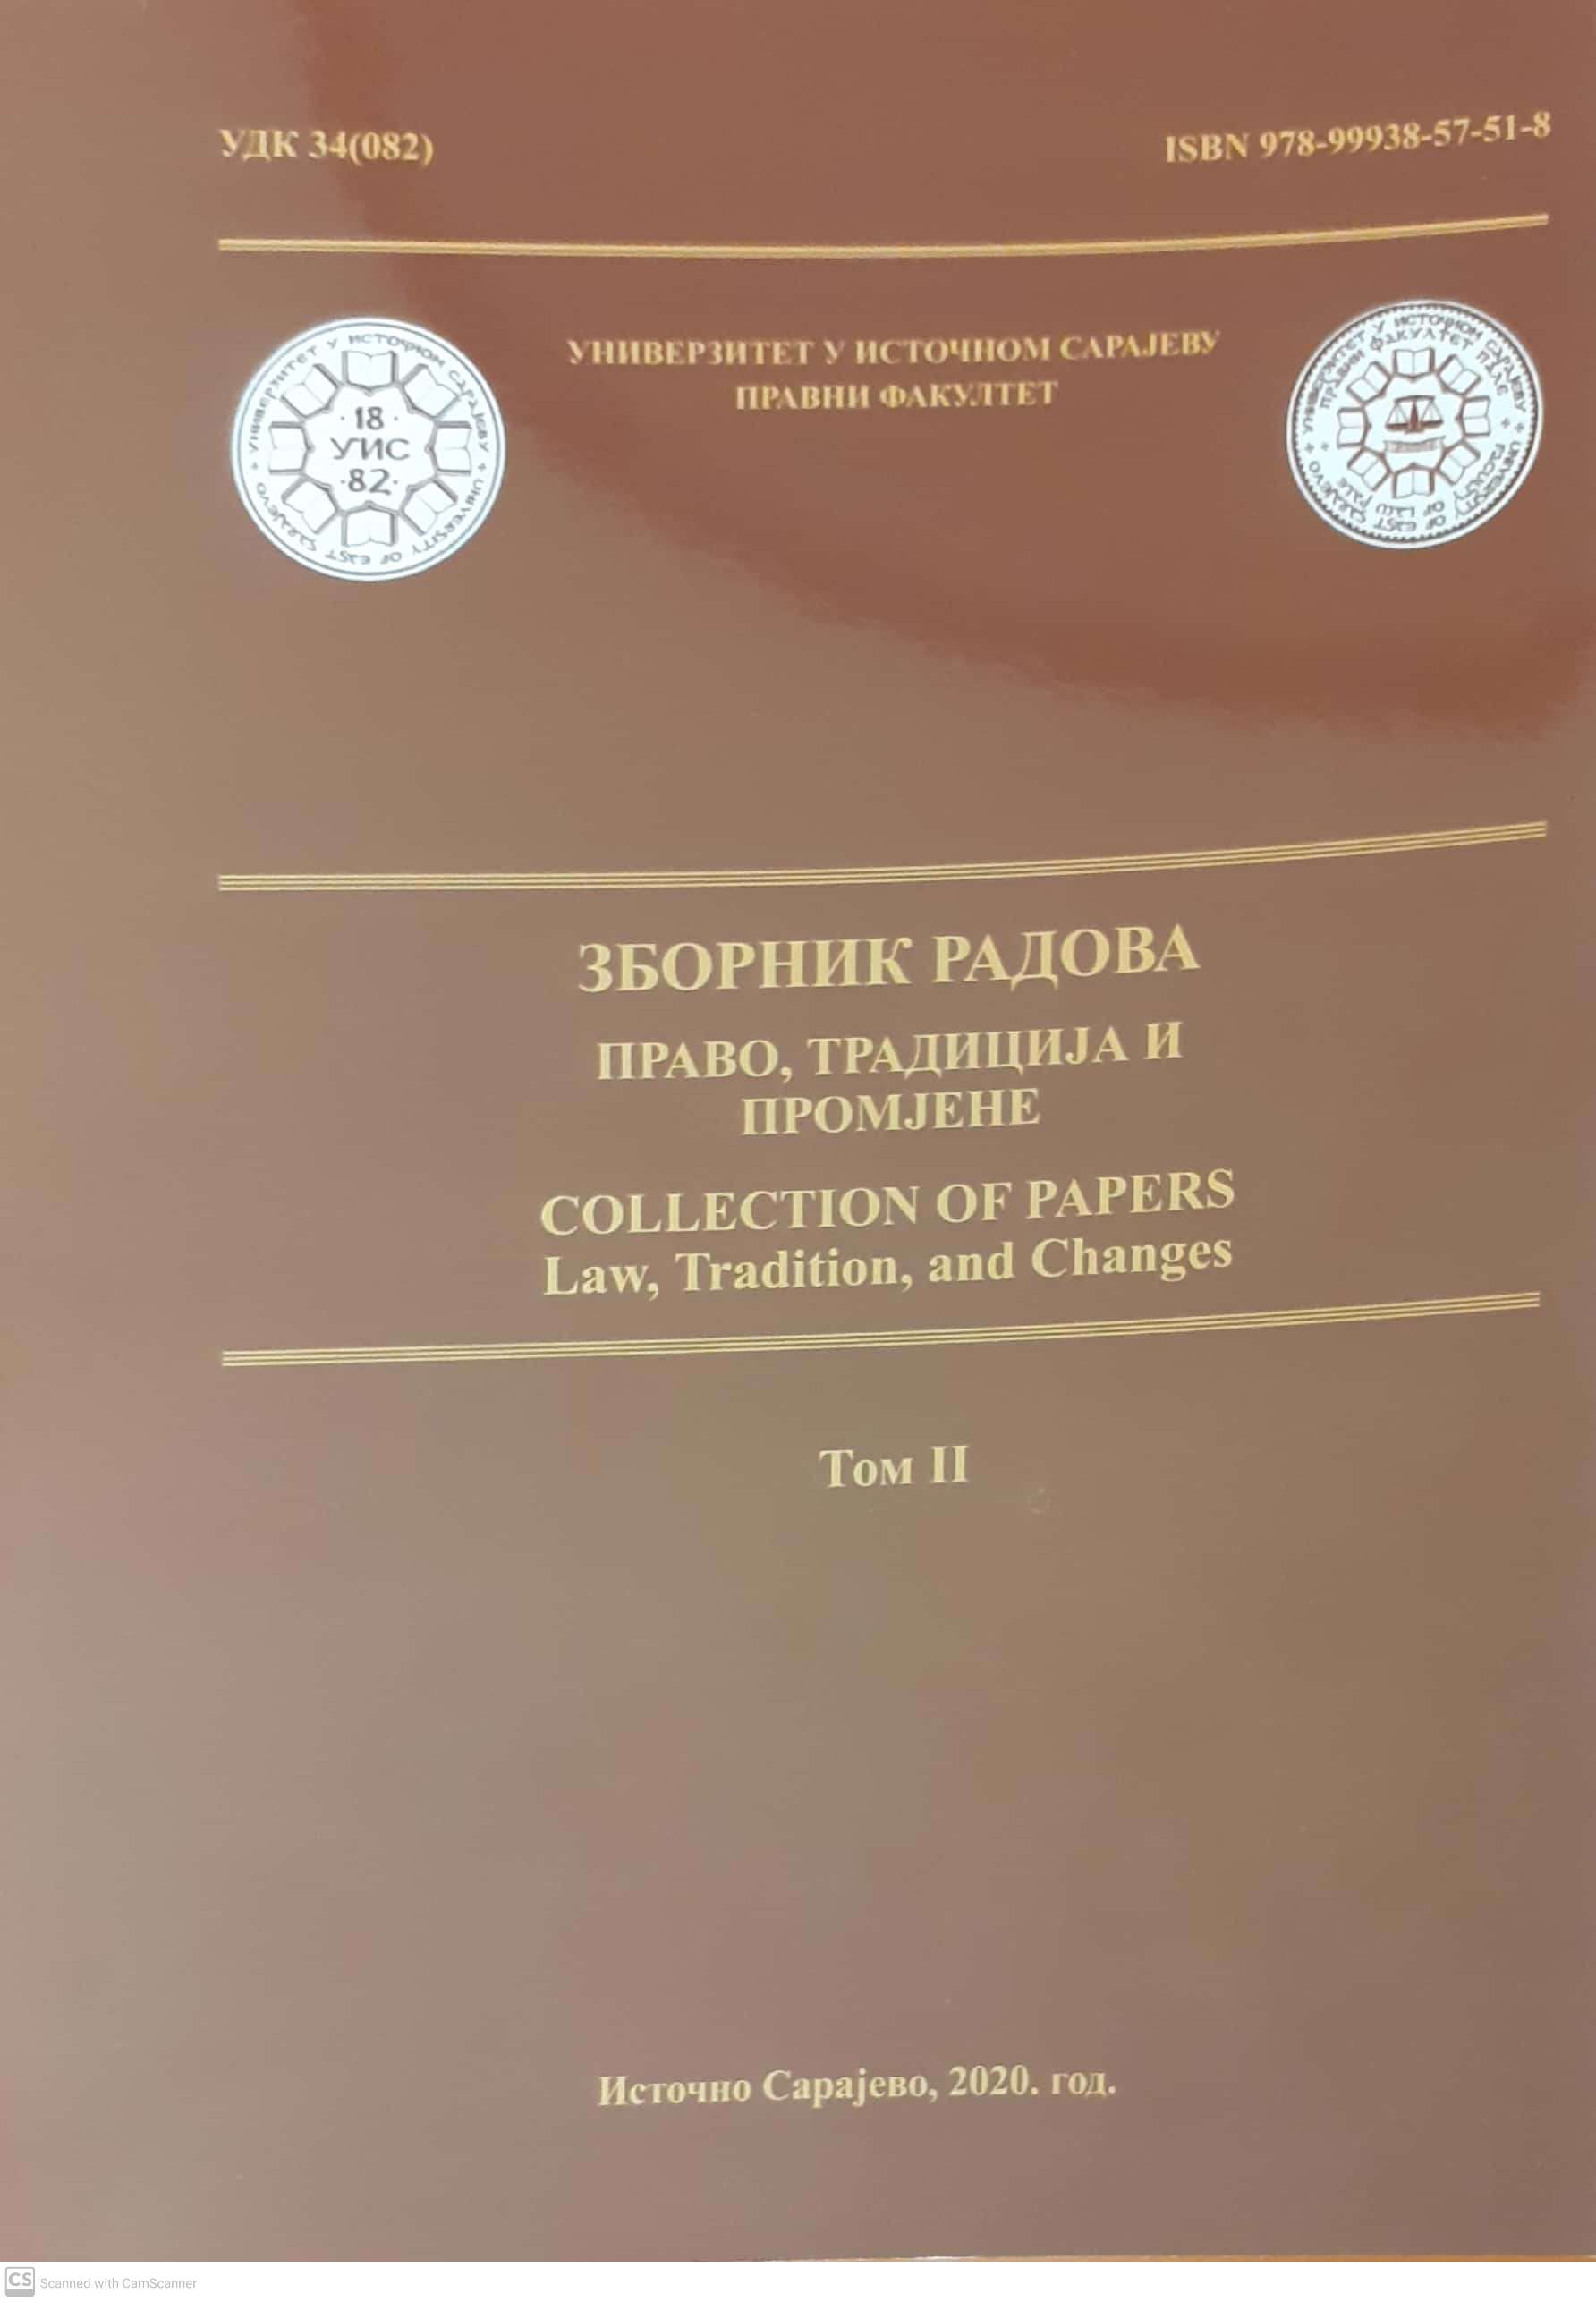 Collection of papers "Law, Tradition and changes" Vol II